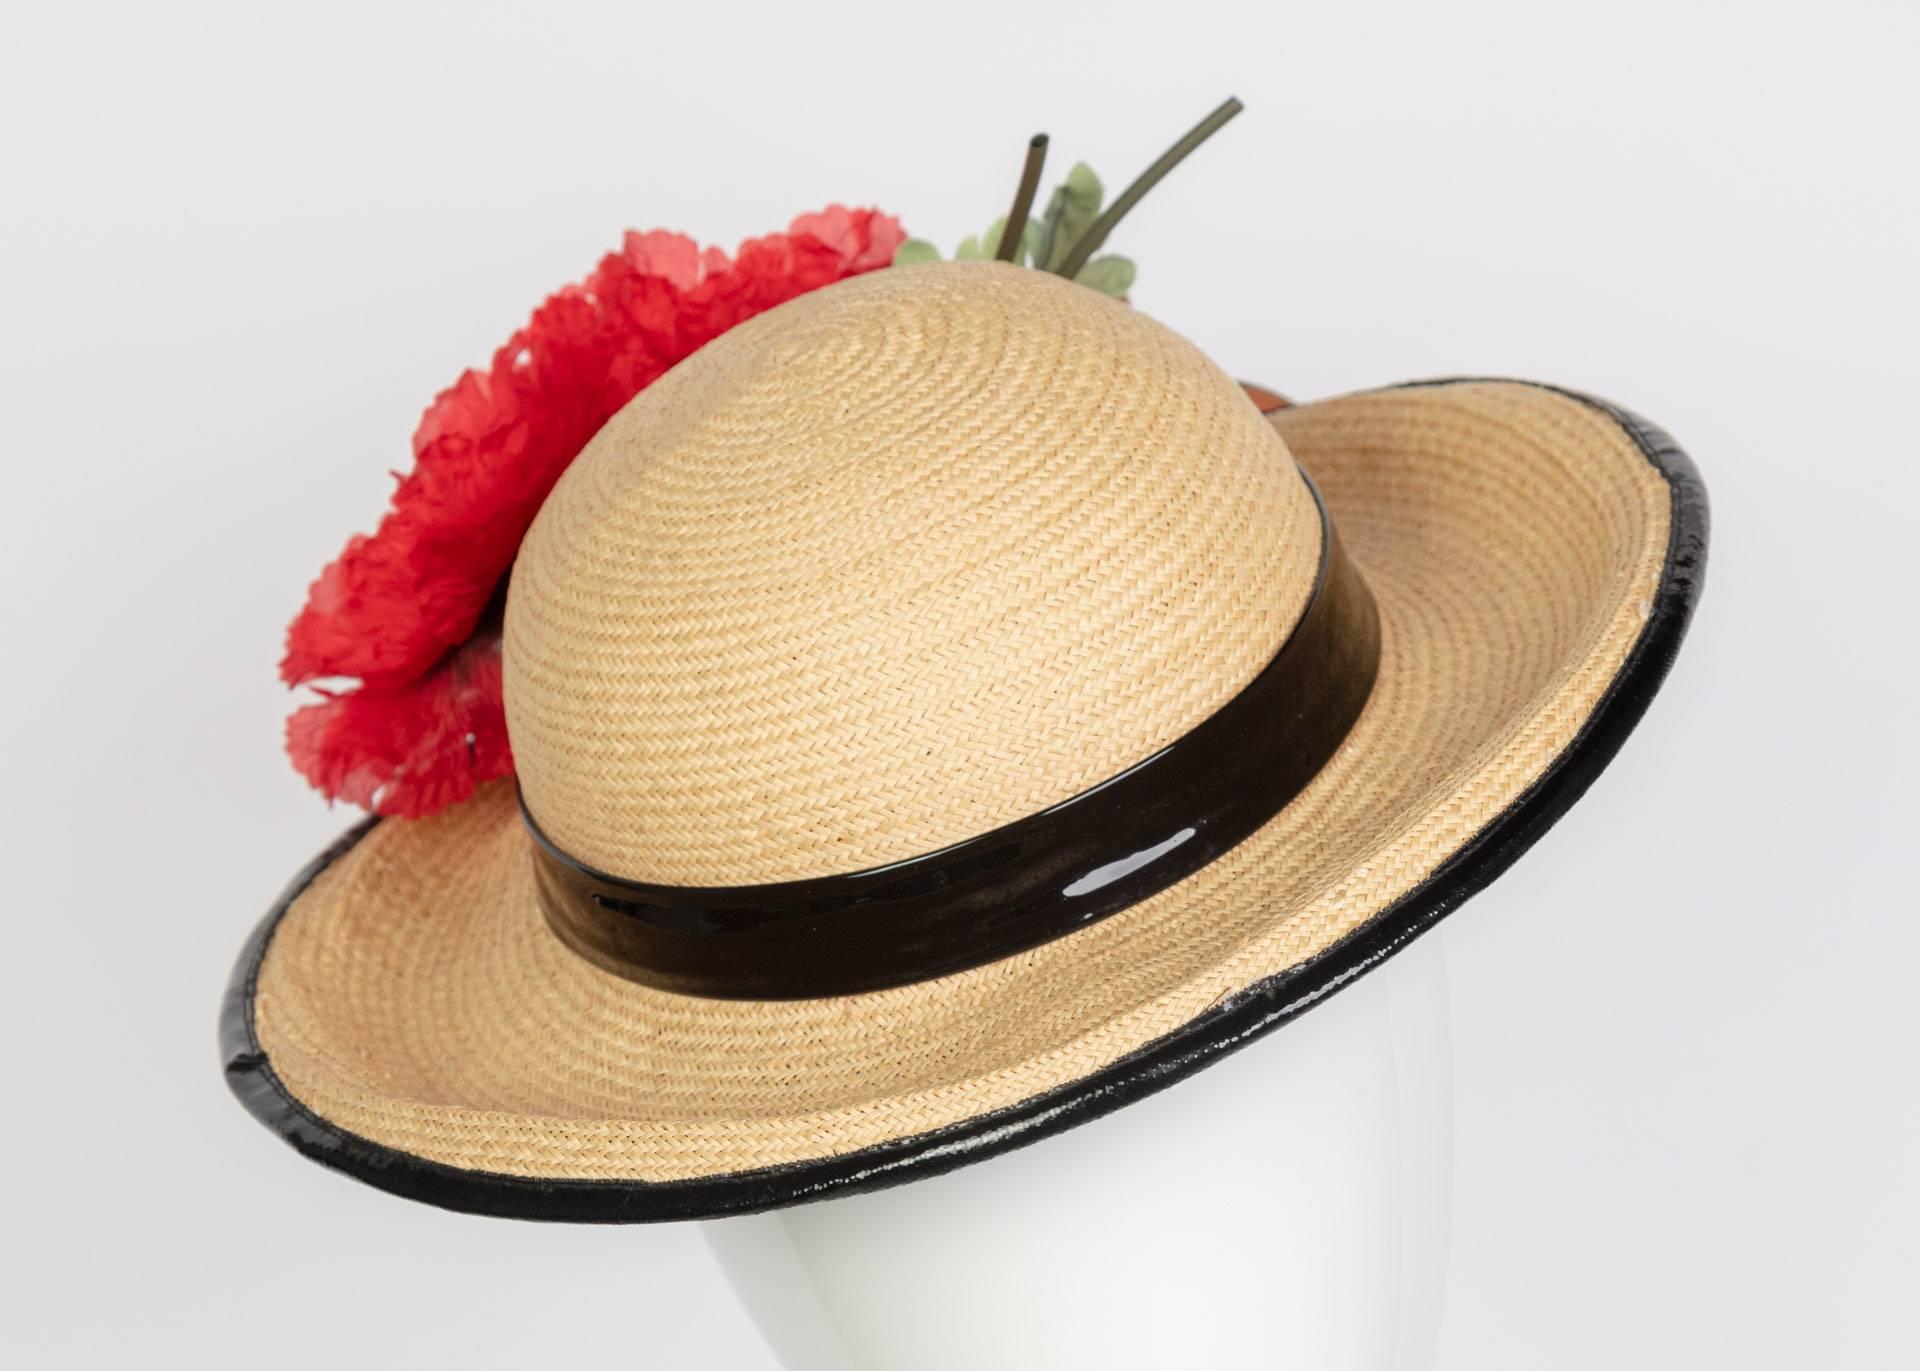 Yves Saint Laurent Straw and Black Patent Leather Red Poppy Flower Hat, 1970s In Excellent Condition For Sale In Boca Raton, FL